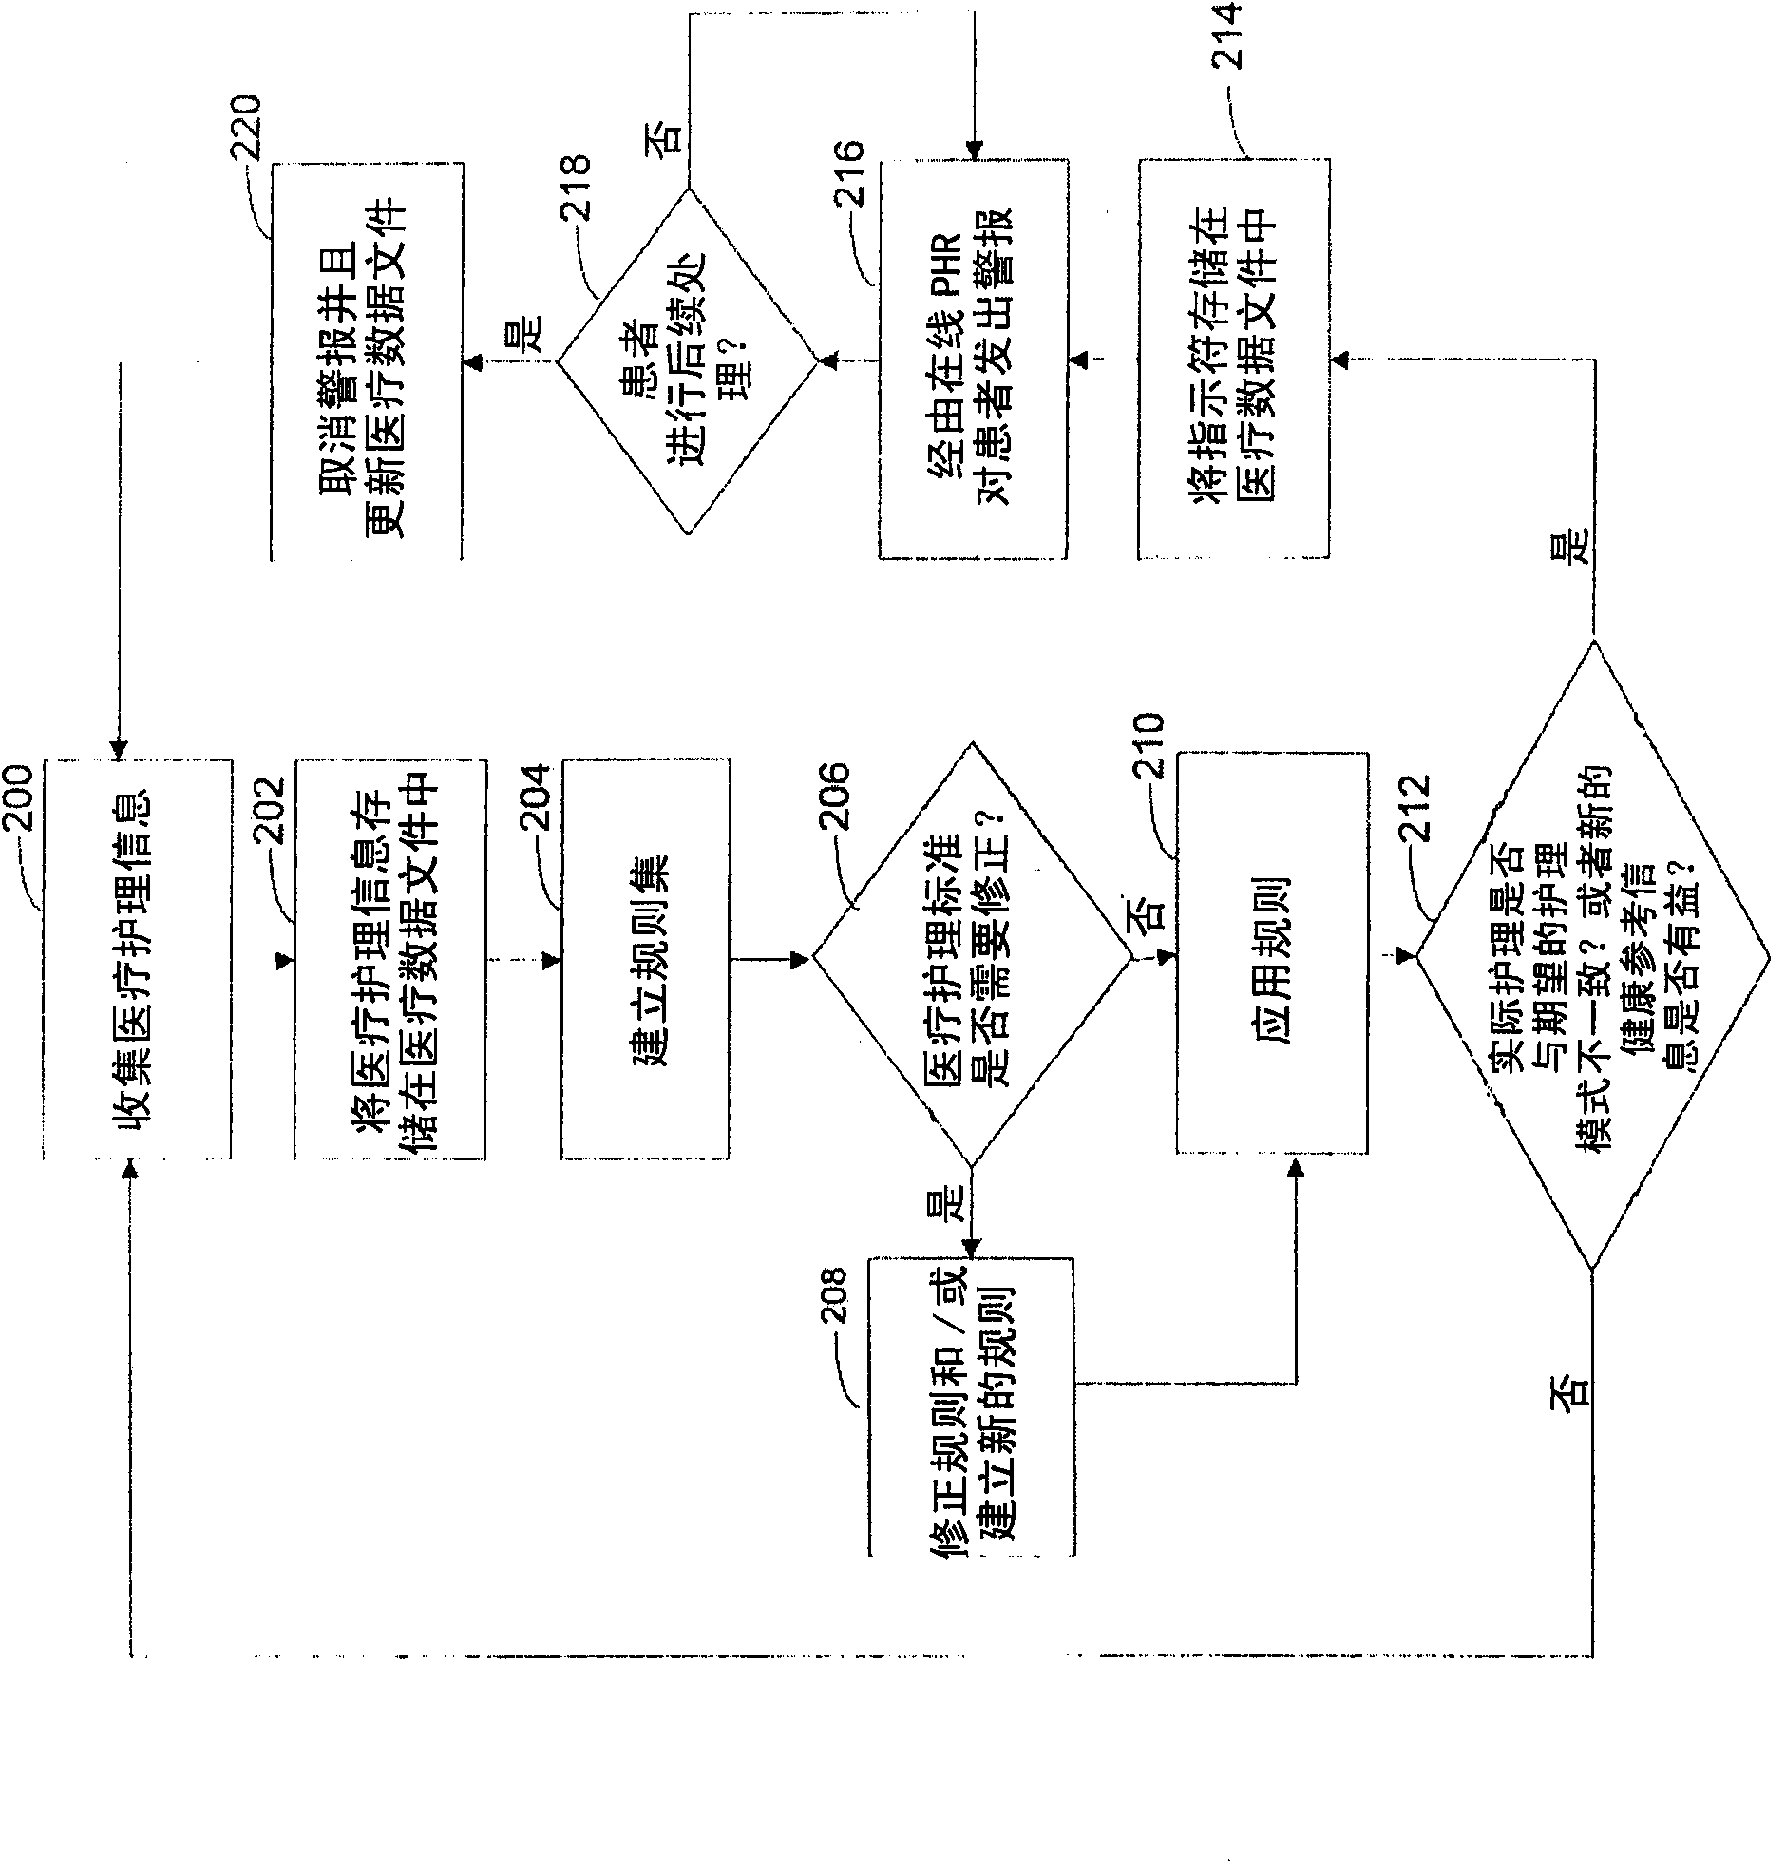 System and method for generating real-time health care alerts